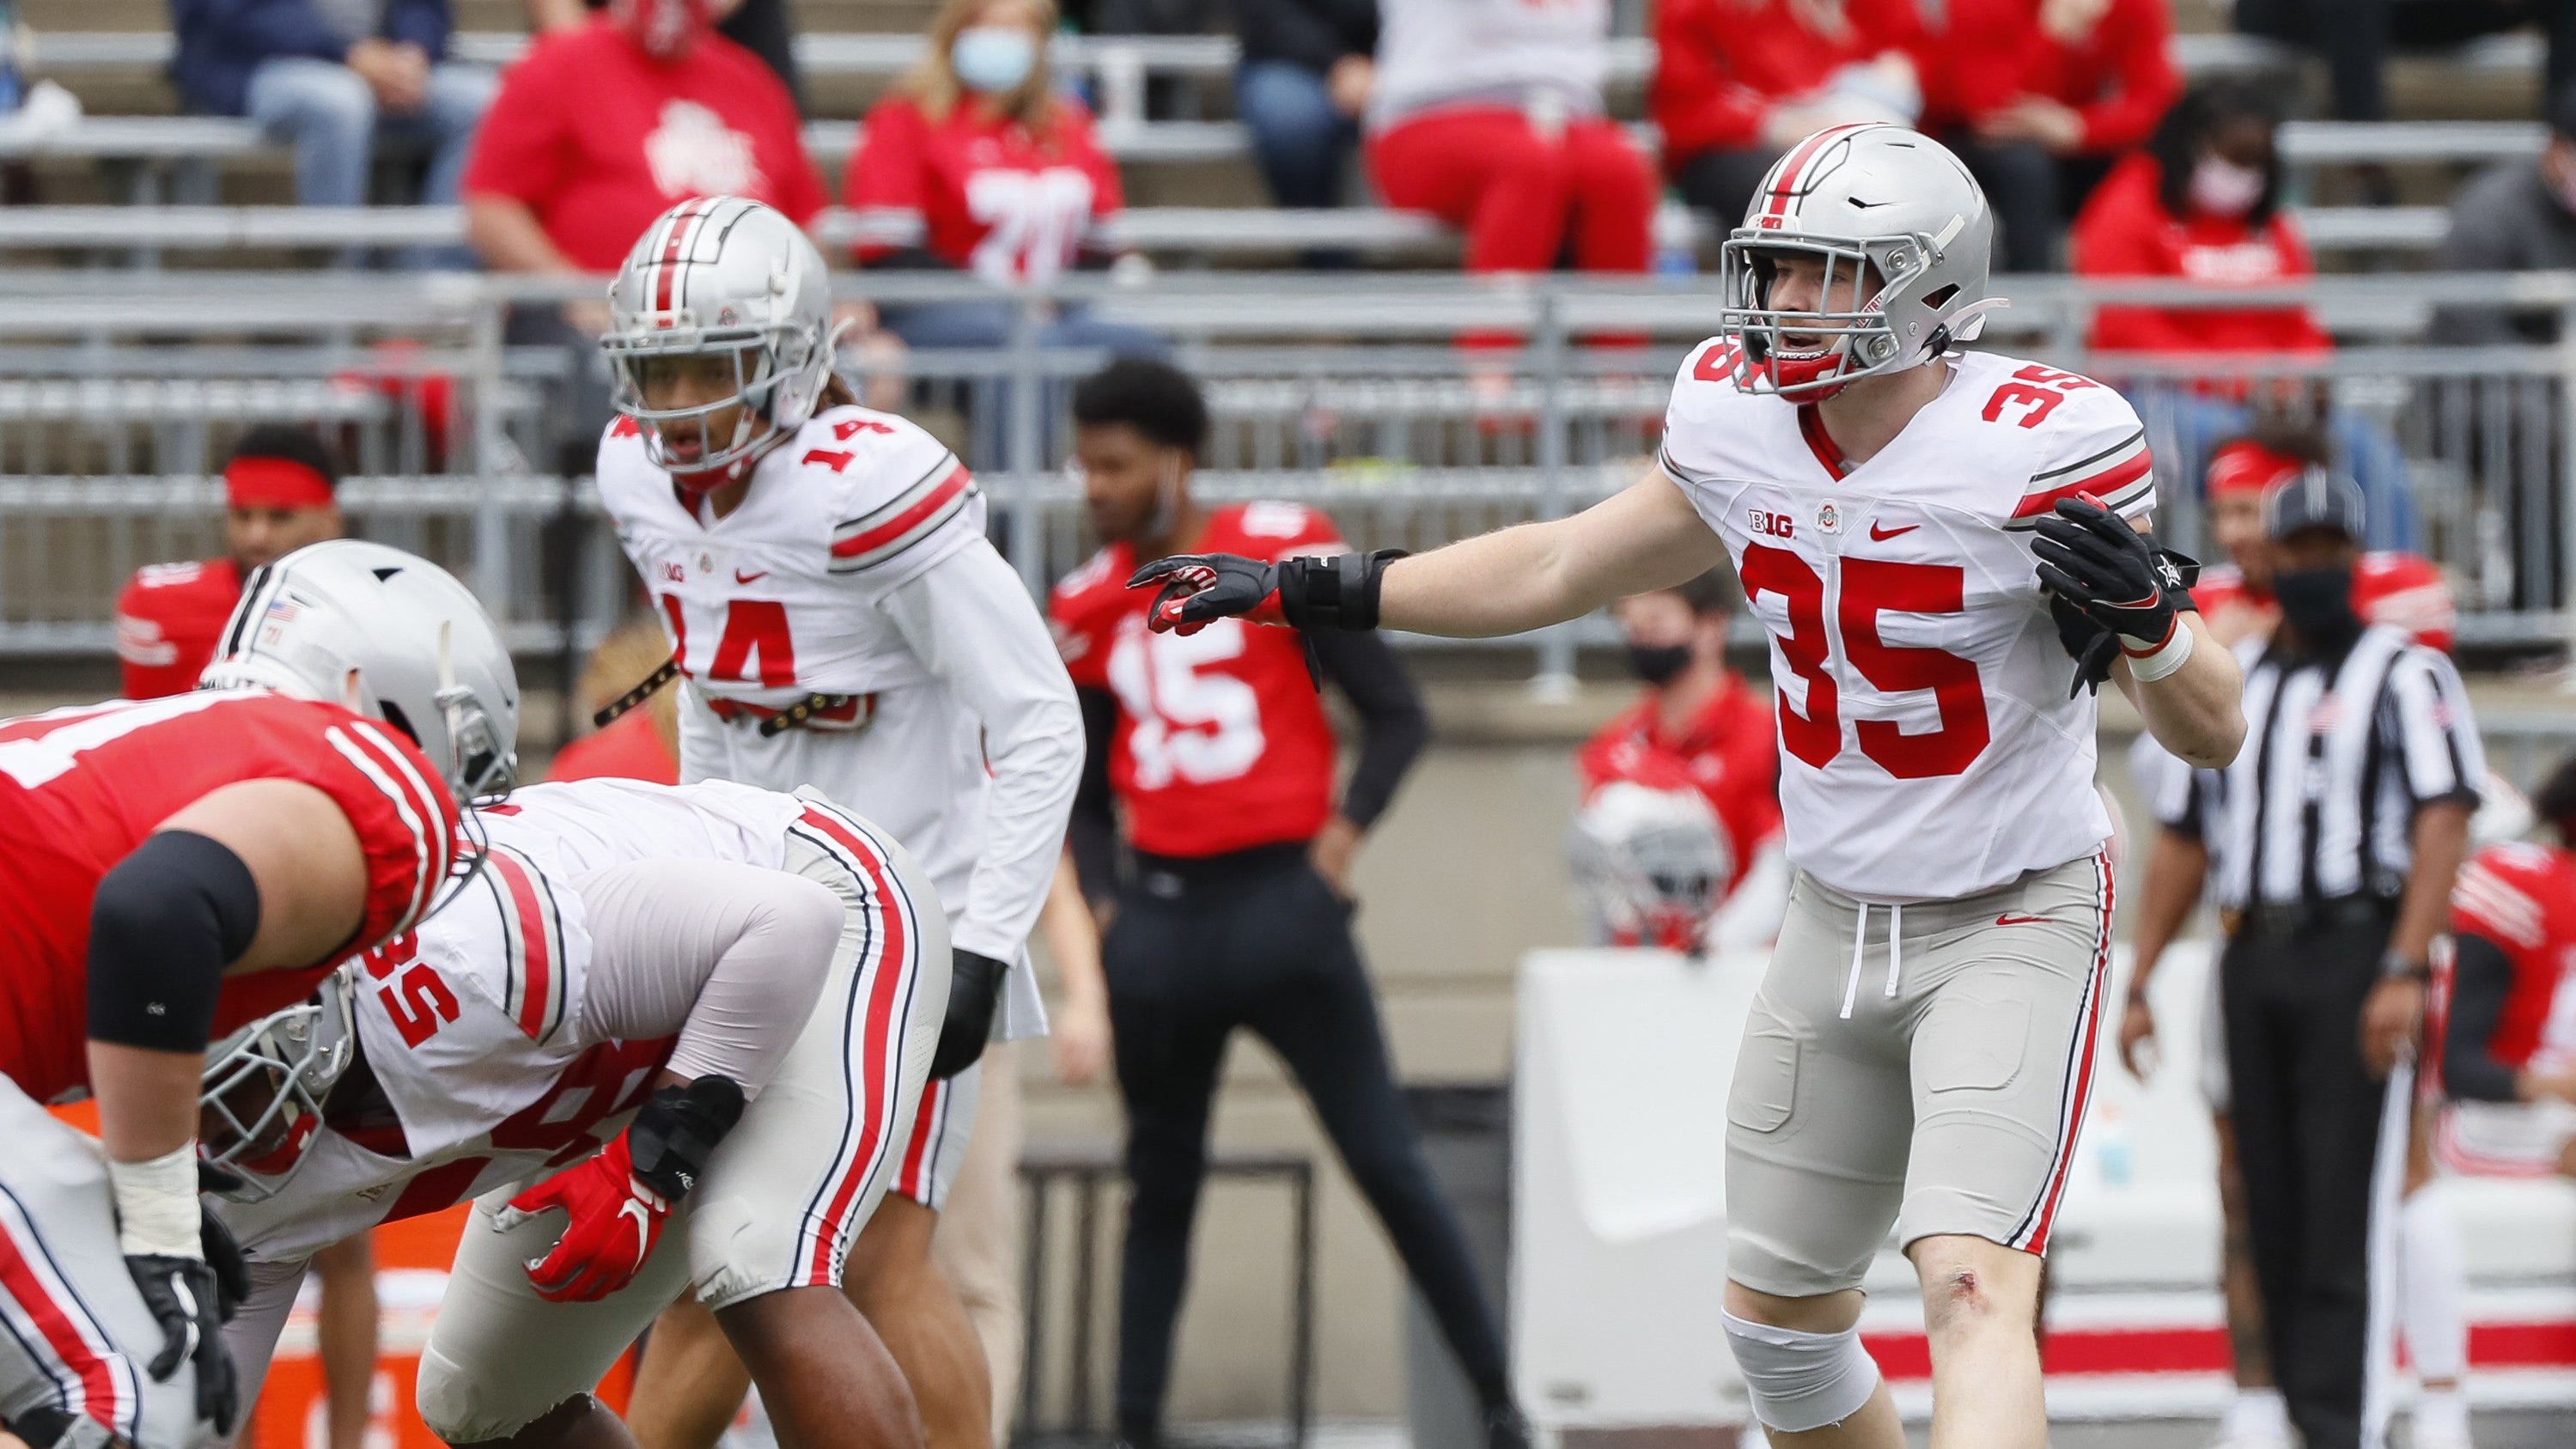 2022 Ohio State spring football game kickoff announced